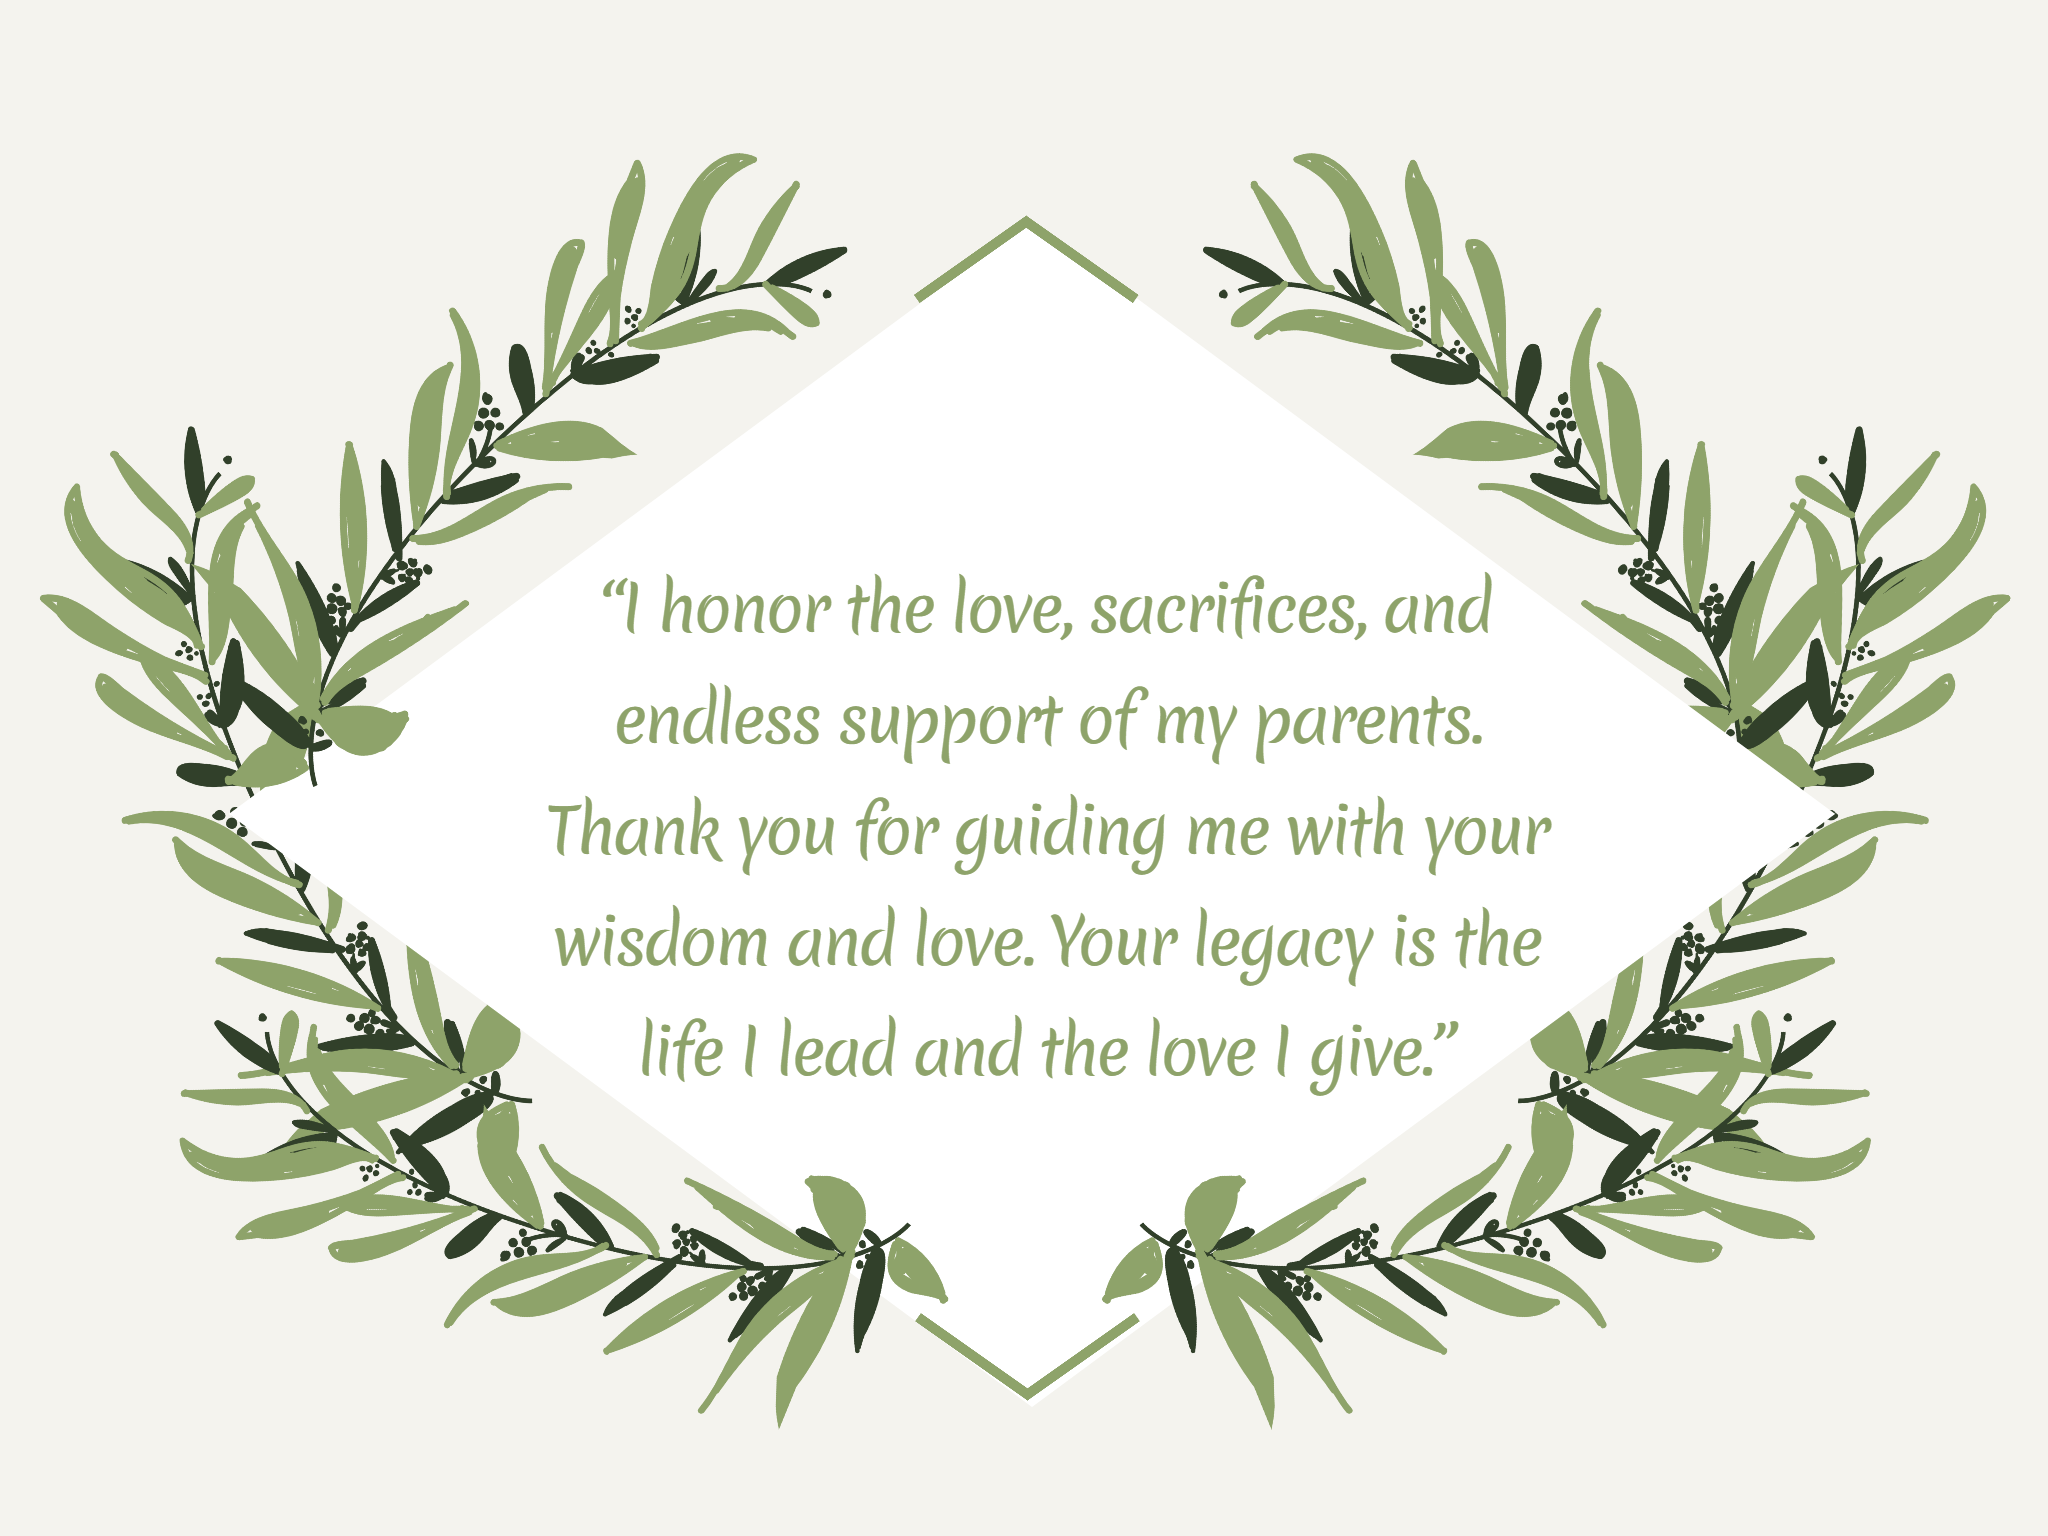 green leaves card with heart touching emotional parents quote